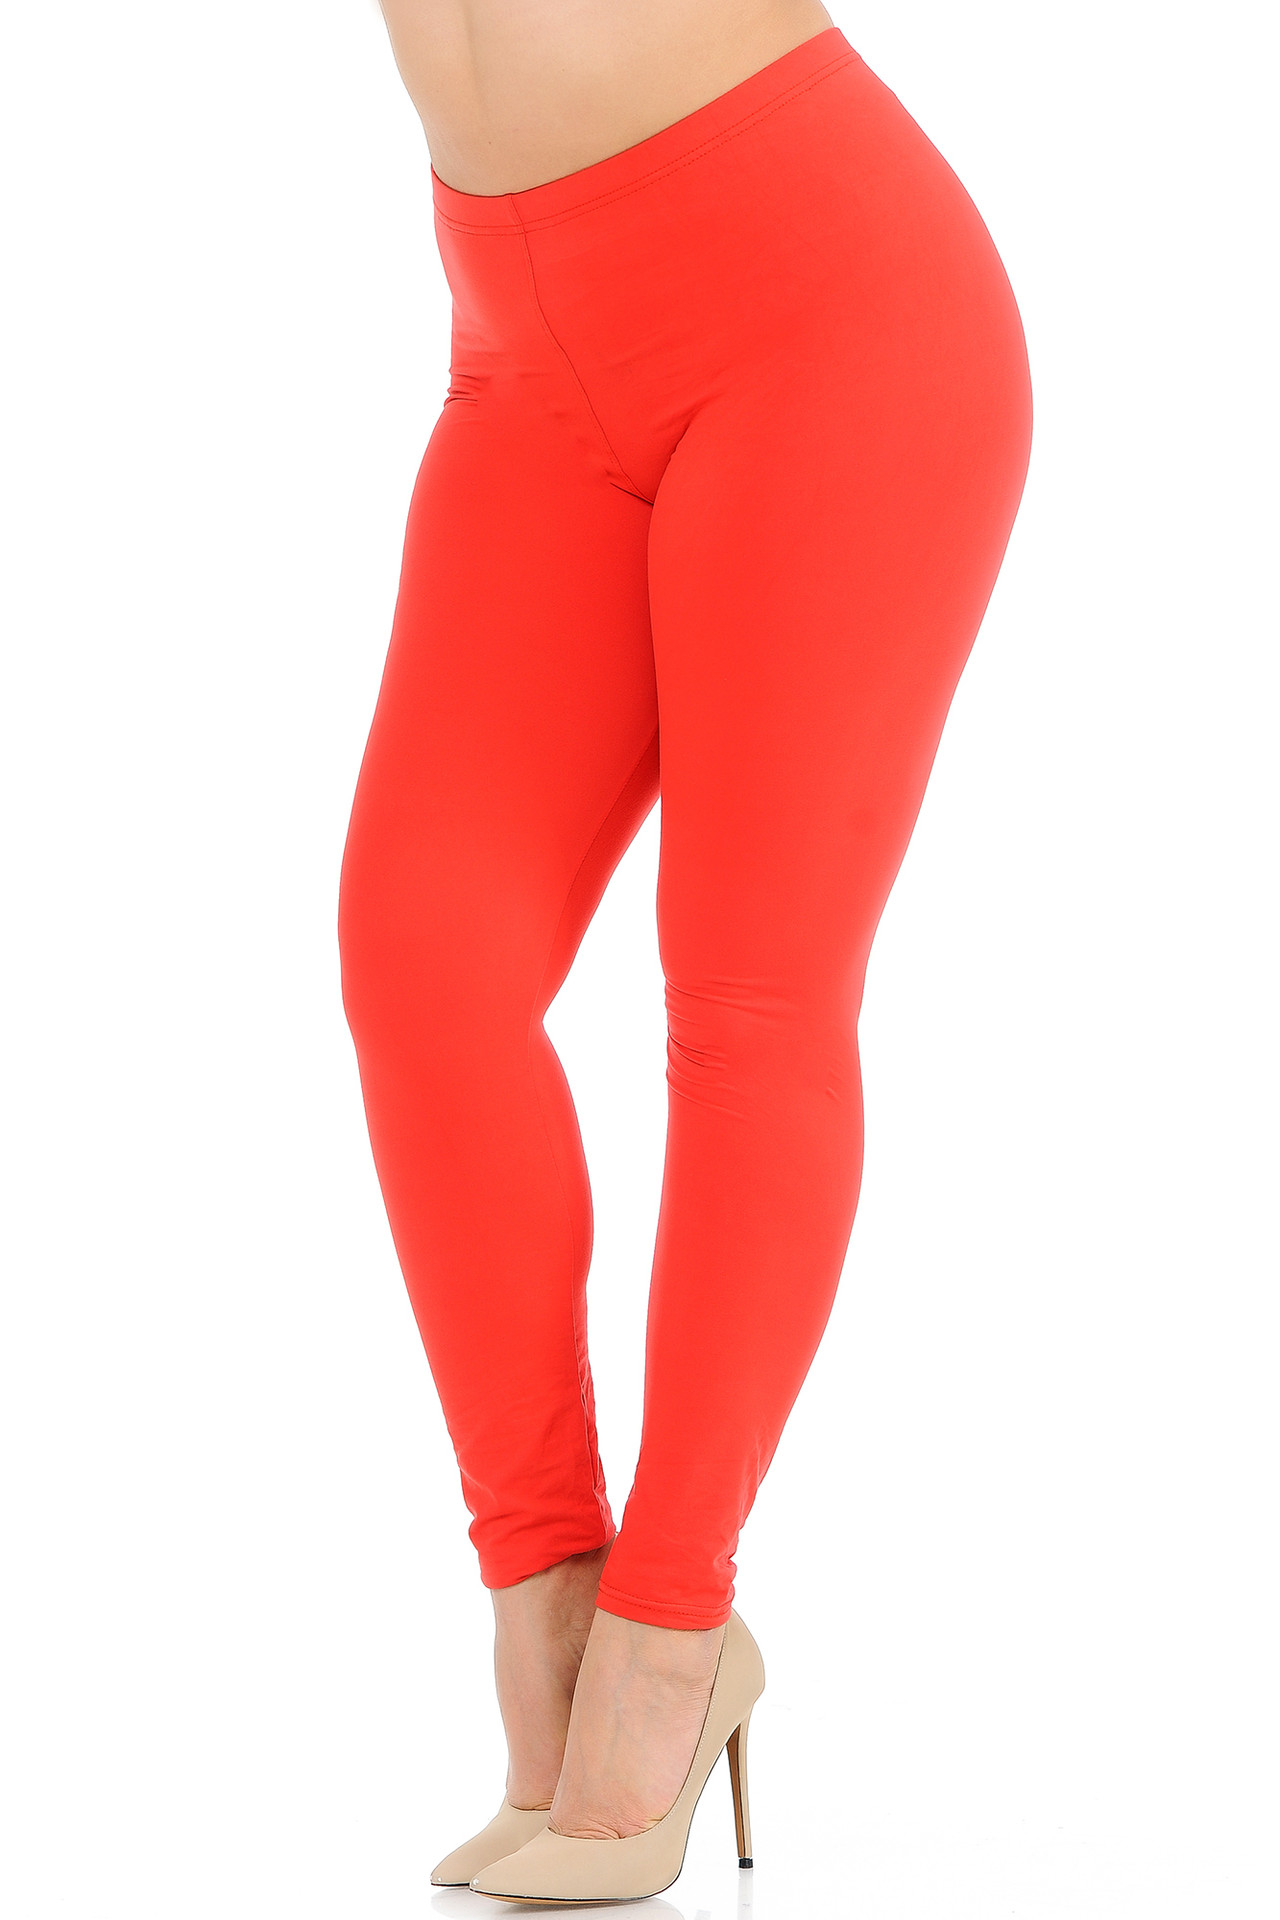 Wholesale Buttery Smooth Plus Size Basic Solid Leggings - 3X-5X